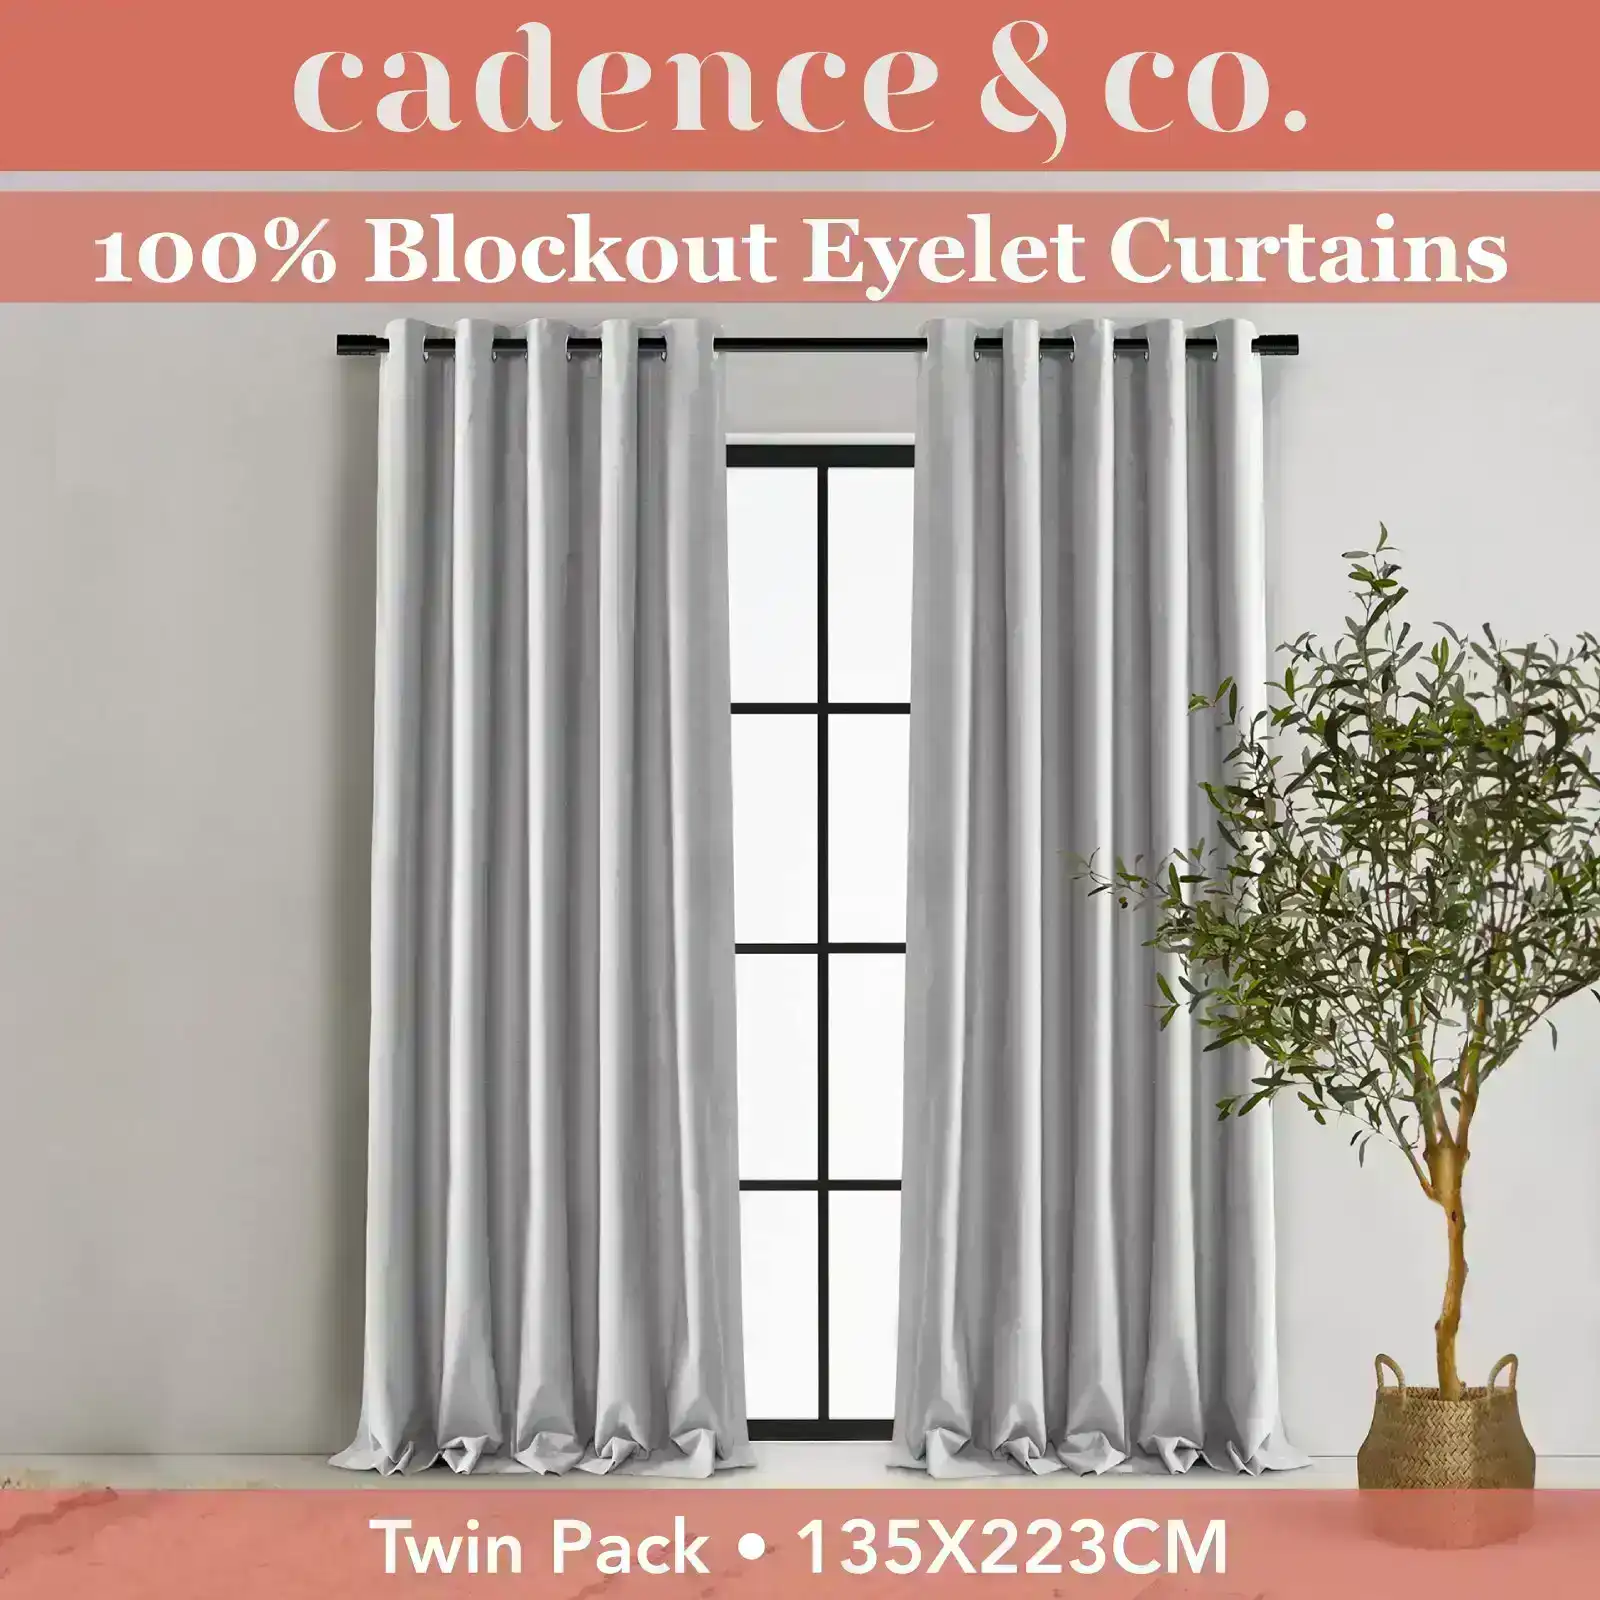 Cadence & Co Byron Matte Velvet 100% Blockout Eyelet Curtains Twin Pack Silver 135x223cm